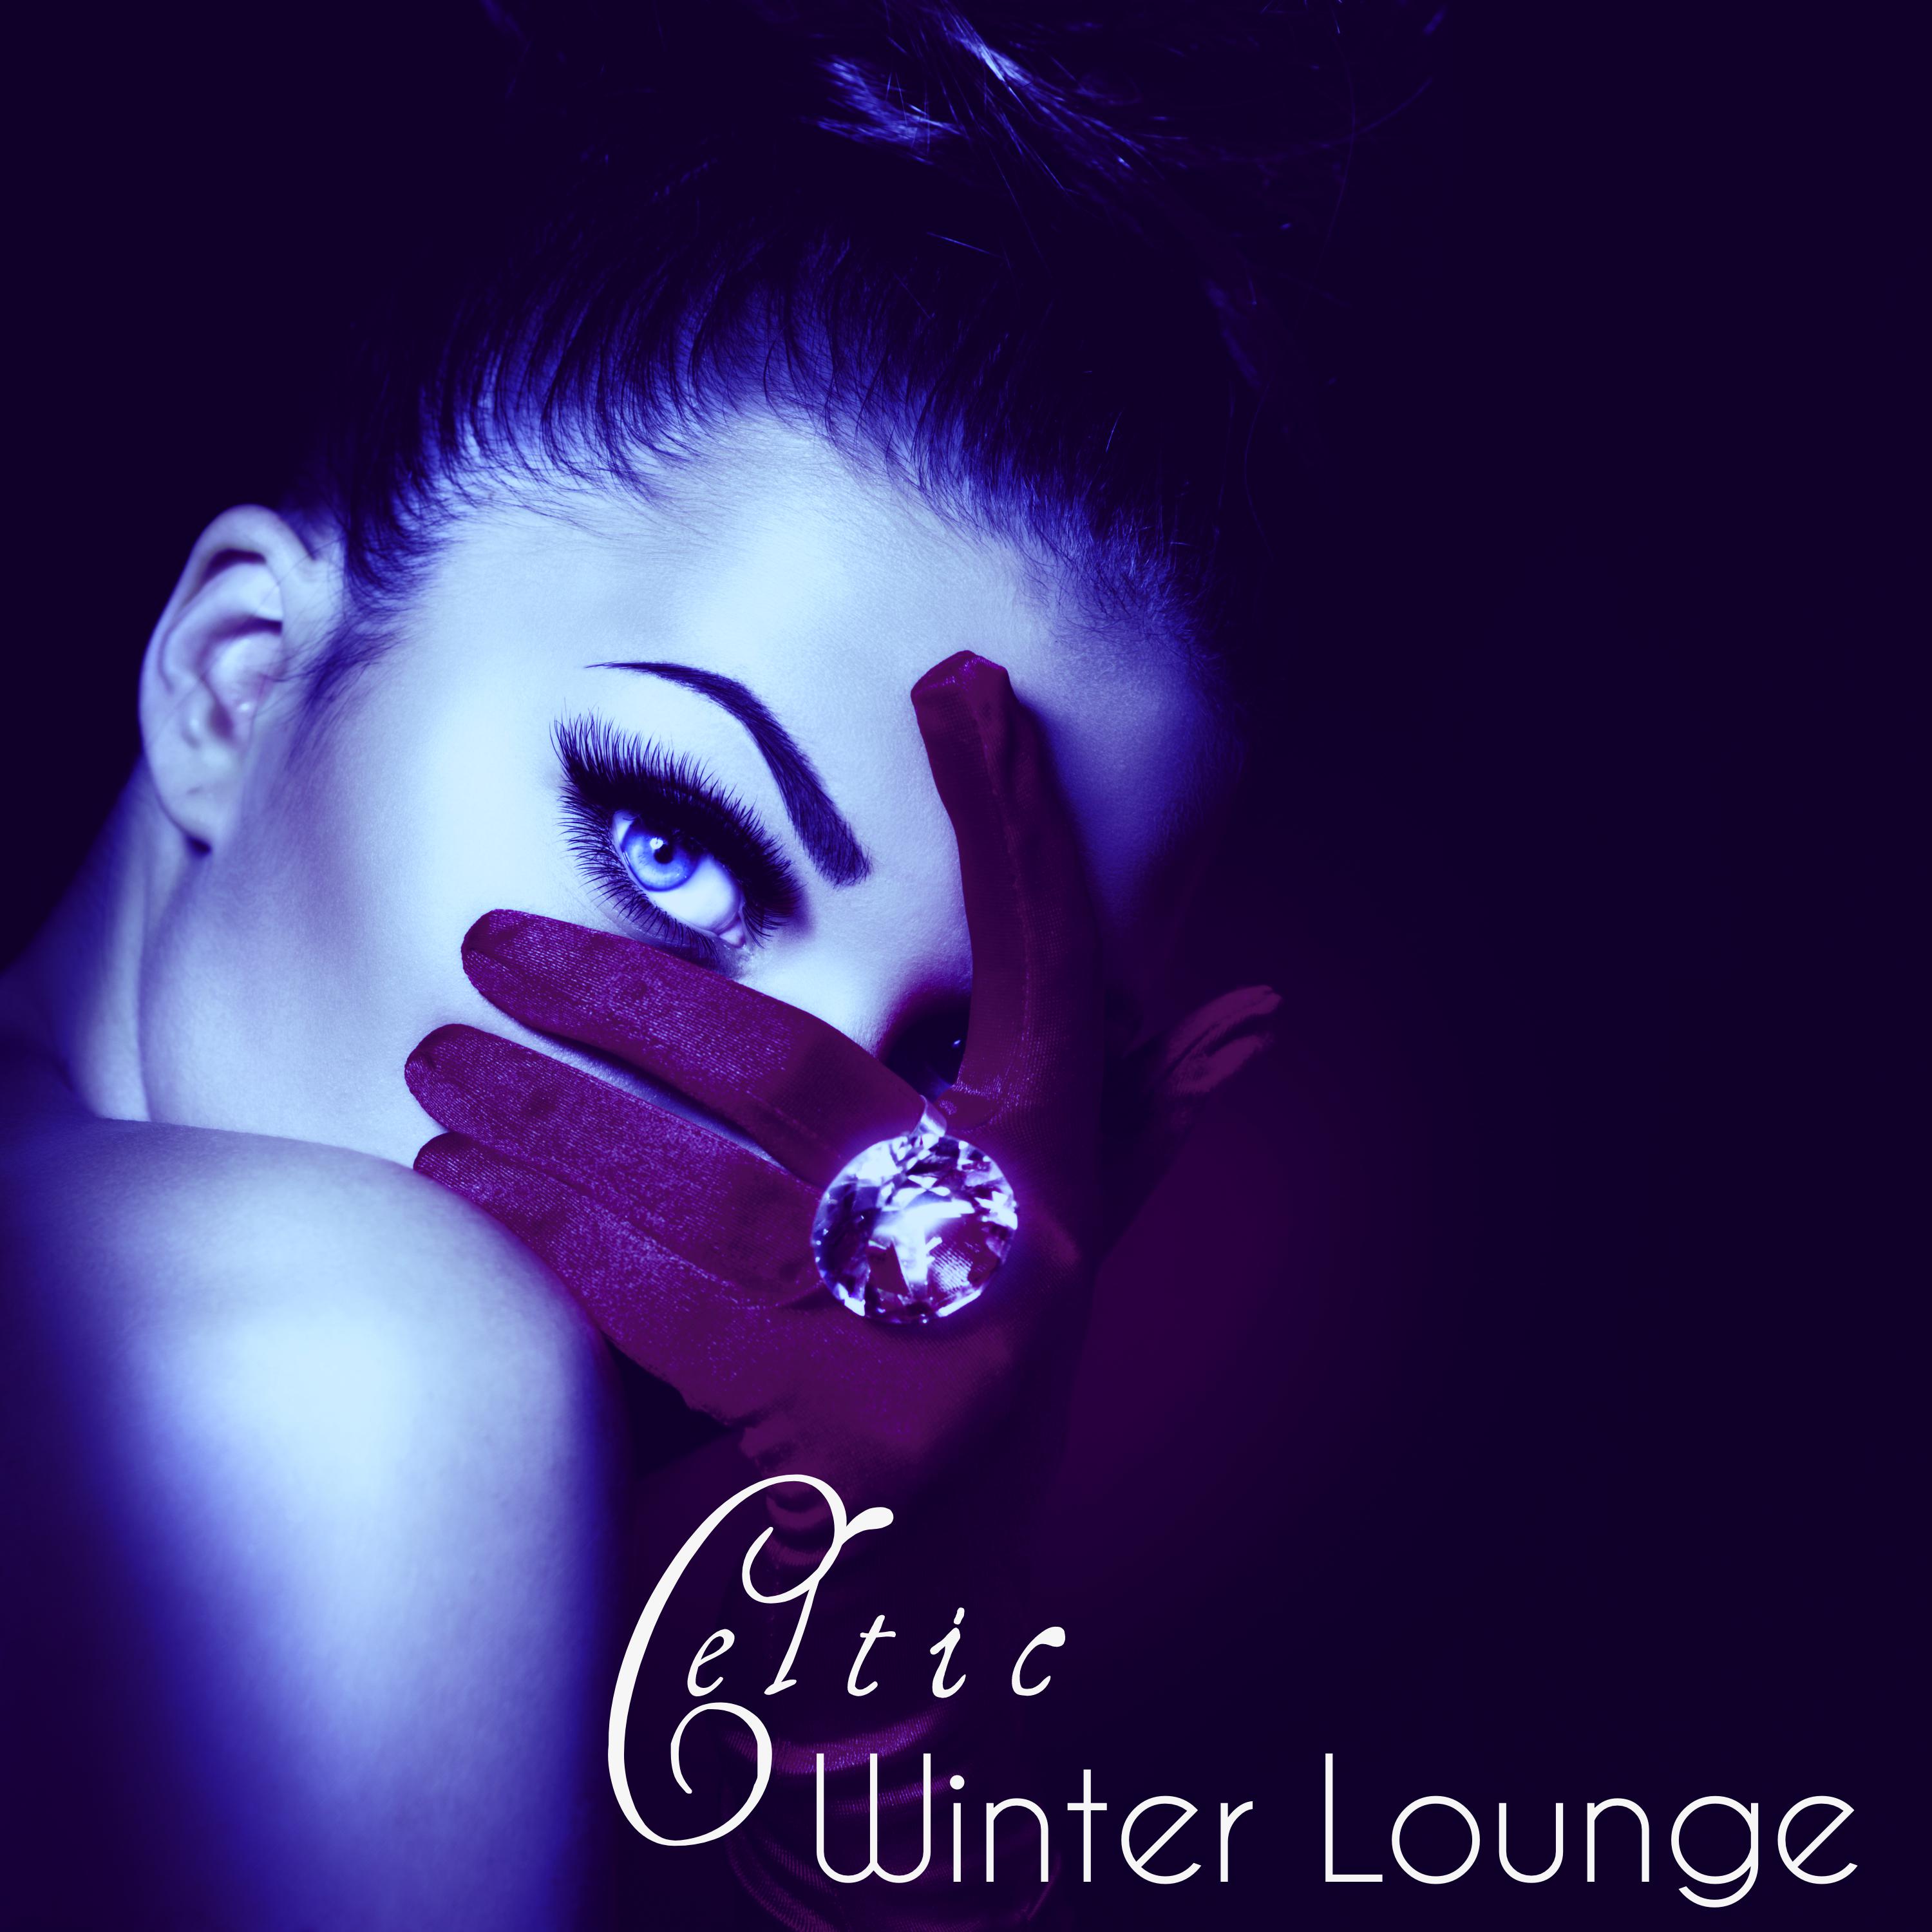 Celtic Winter Lounge  Winter Solstice Endless Love Sensual Night Tantric  Soundtrack